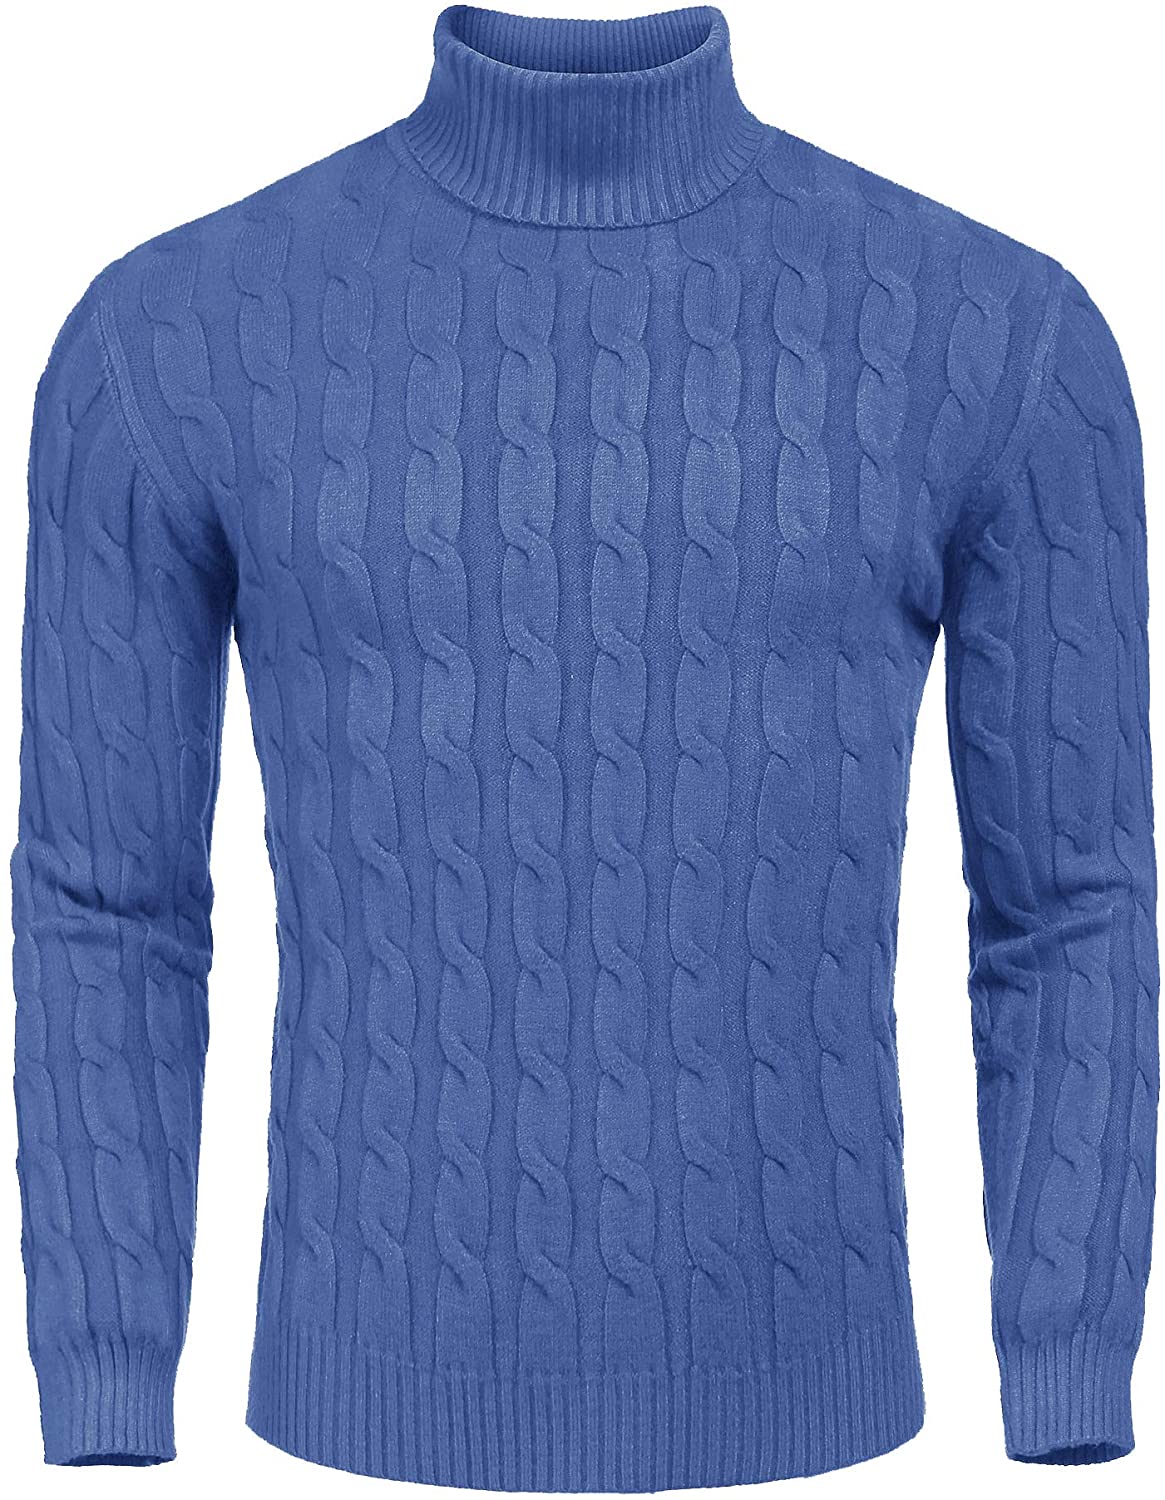 COOFANDY Men's Slim Fit Turtleneck Sweater Casual Lightweight Knitted Pullover Sweaters 